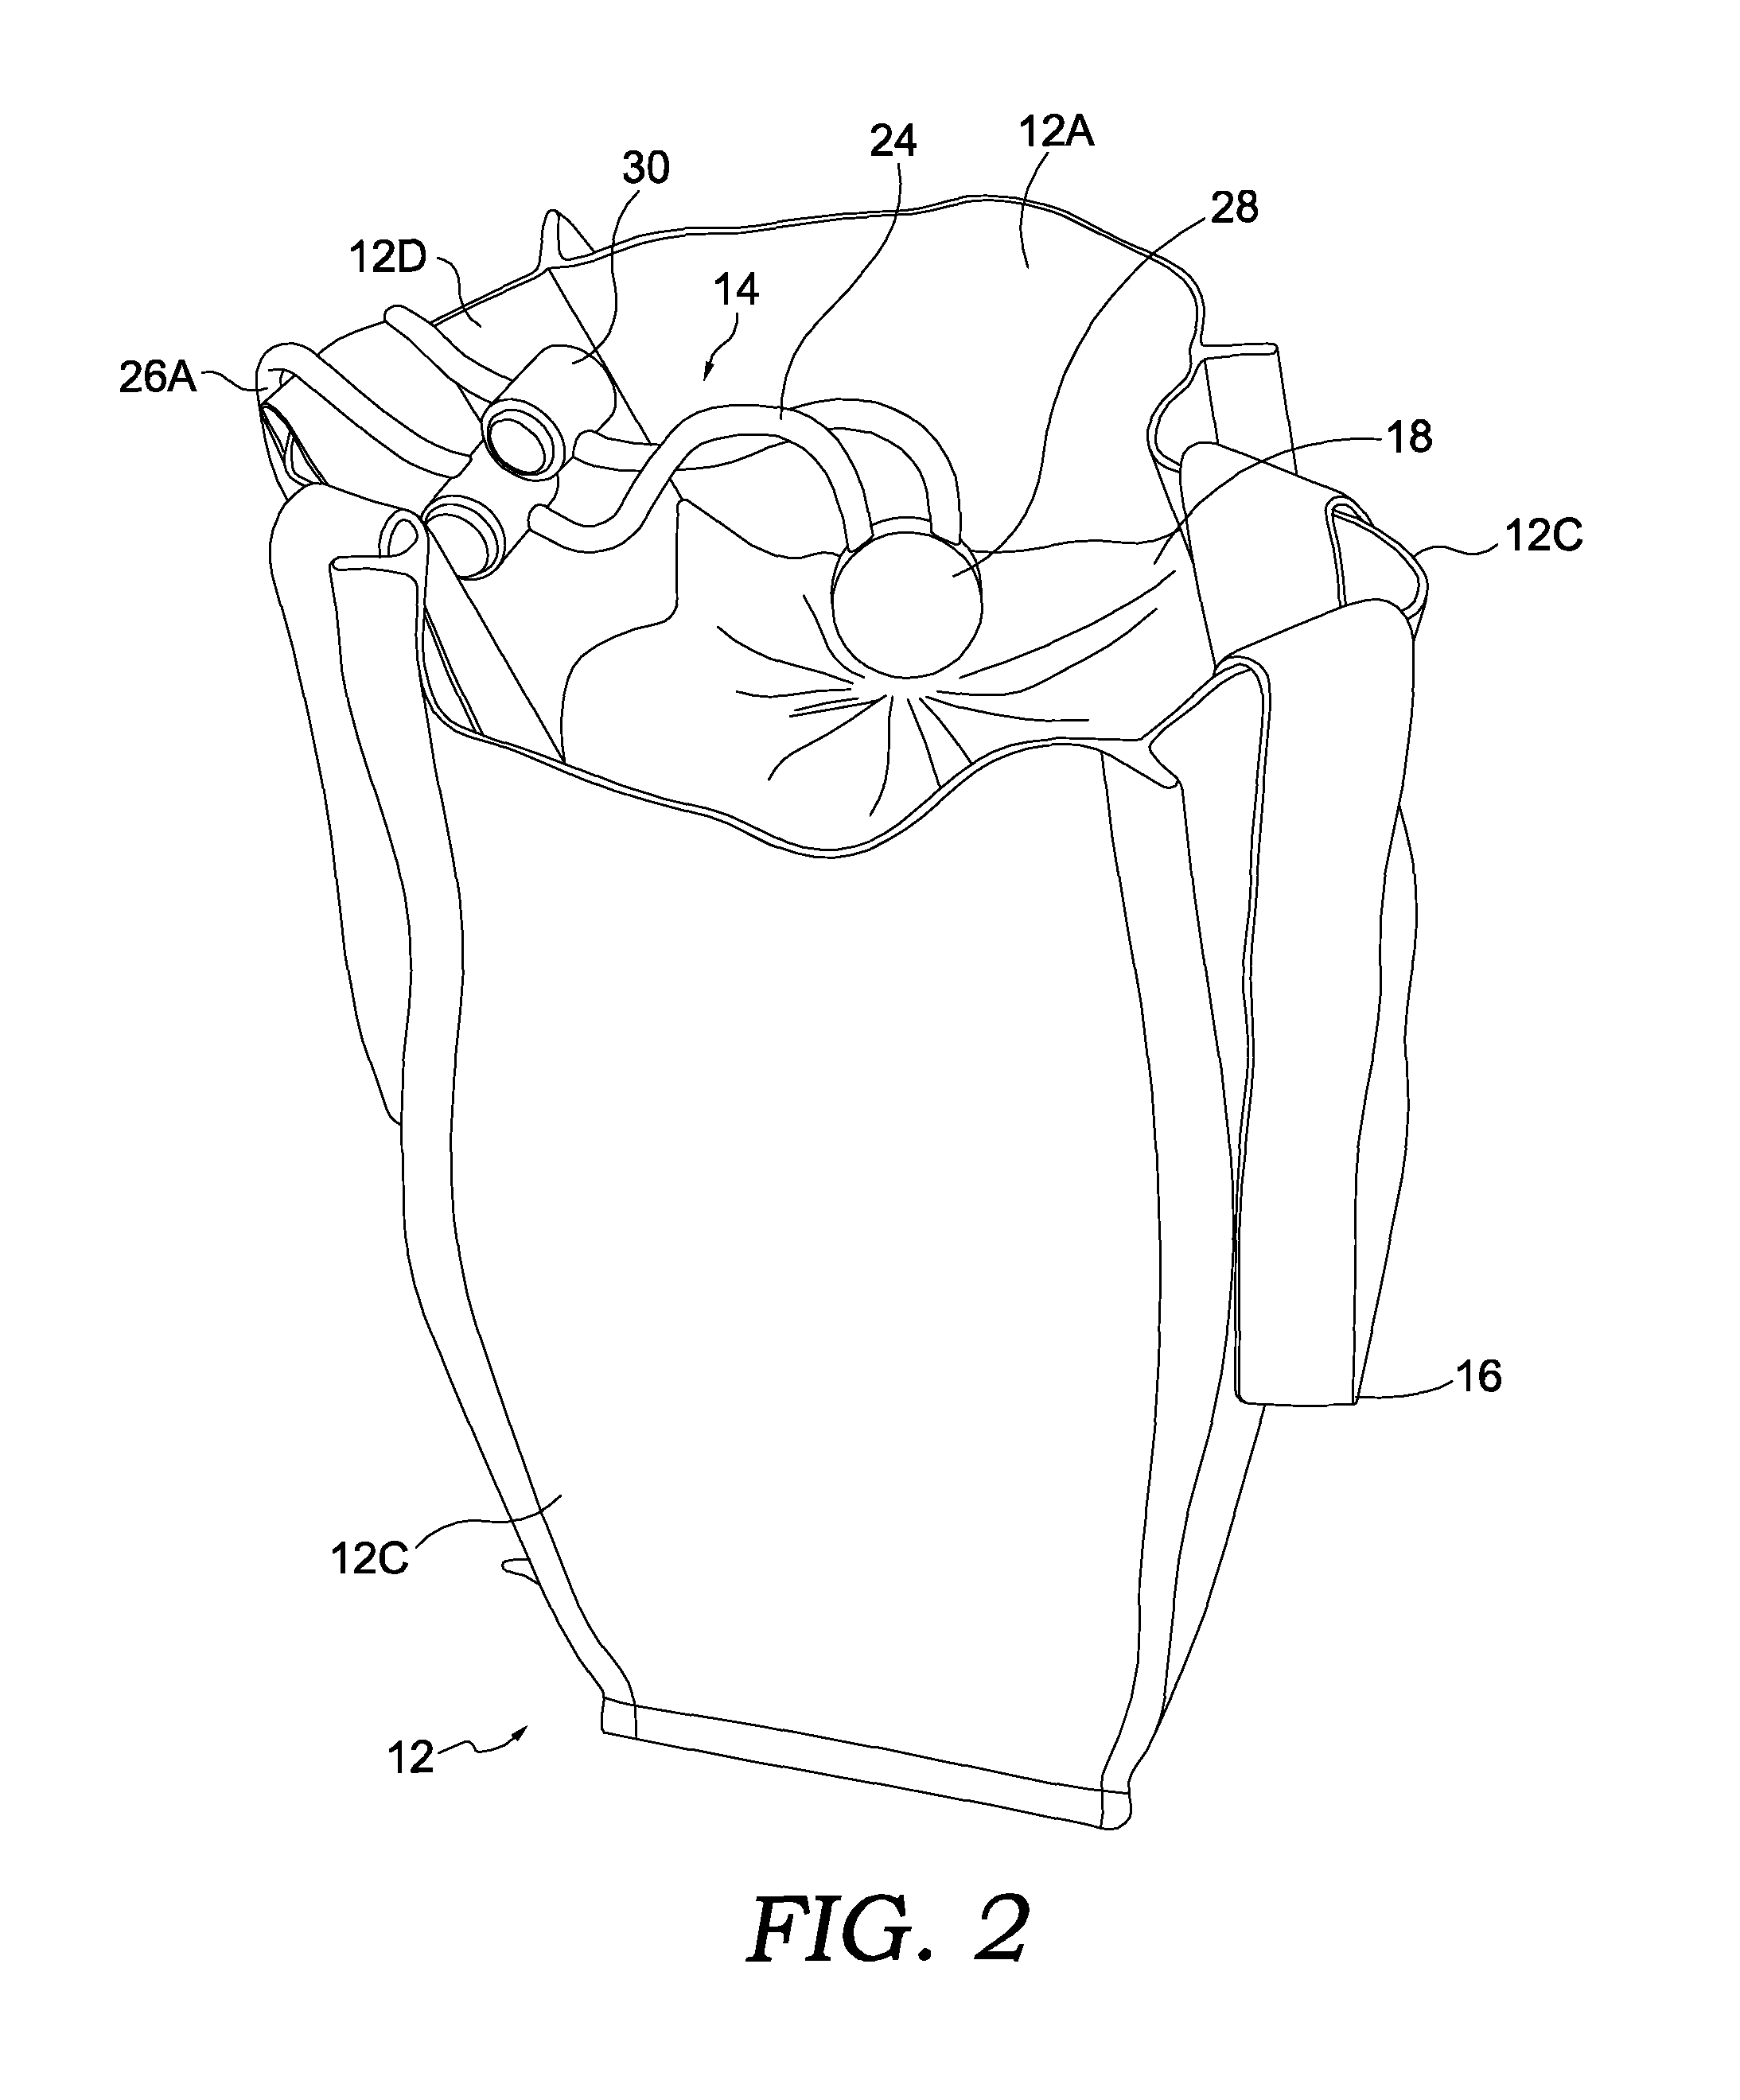 Child-resistant closure mechanism and packaging